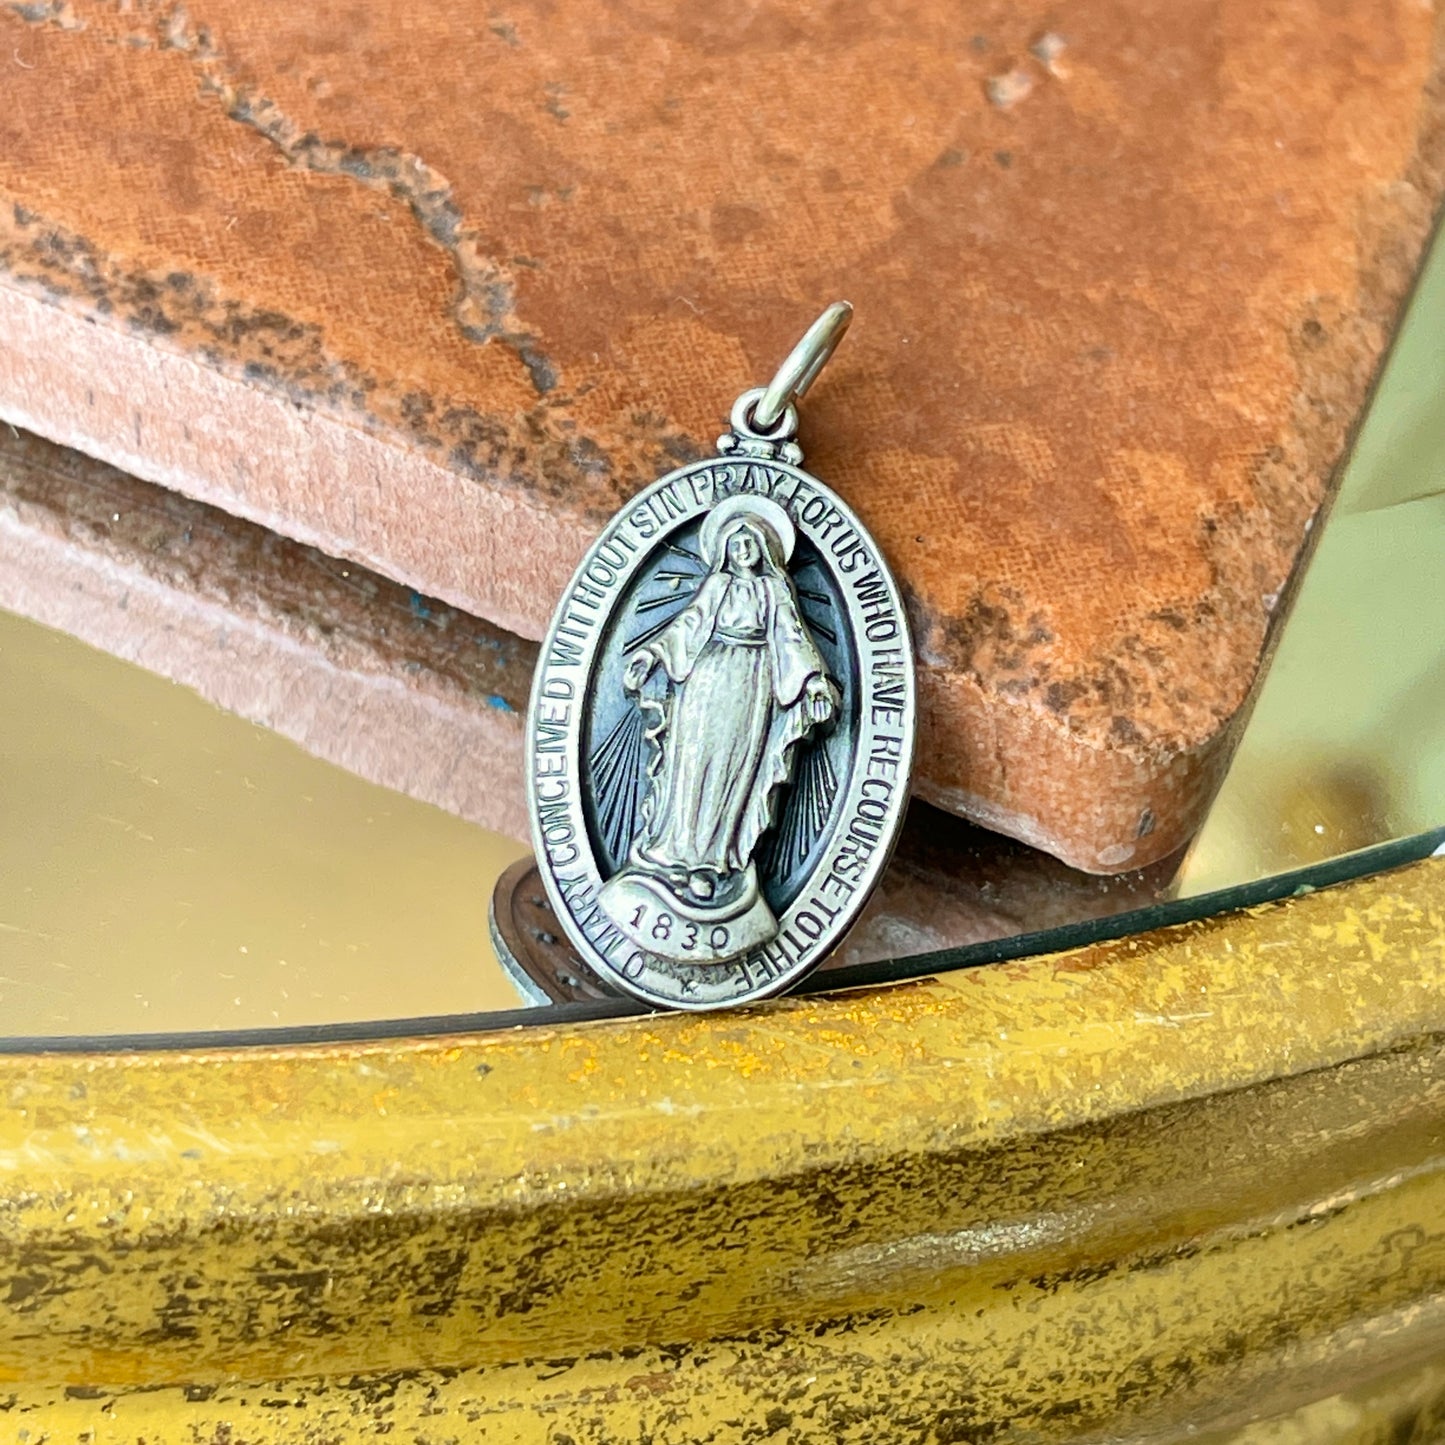 Sterling Silver Antiqued Miraculous Medal Oval Pendant 30mm